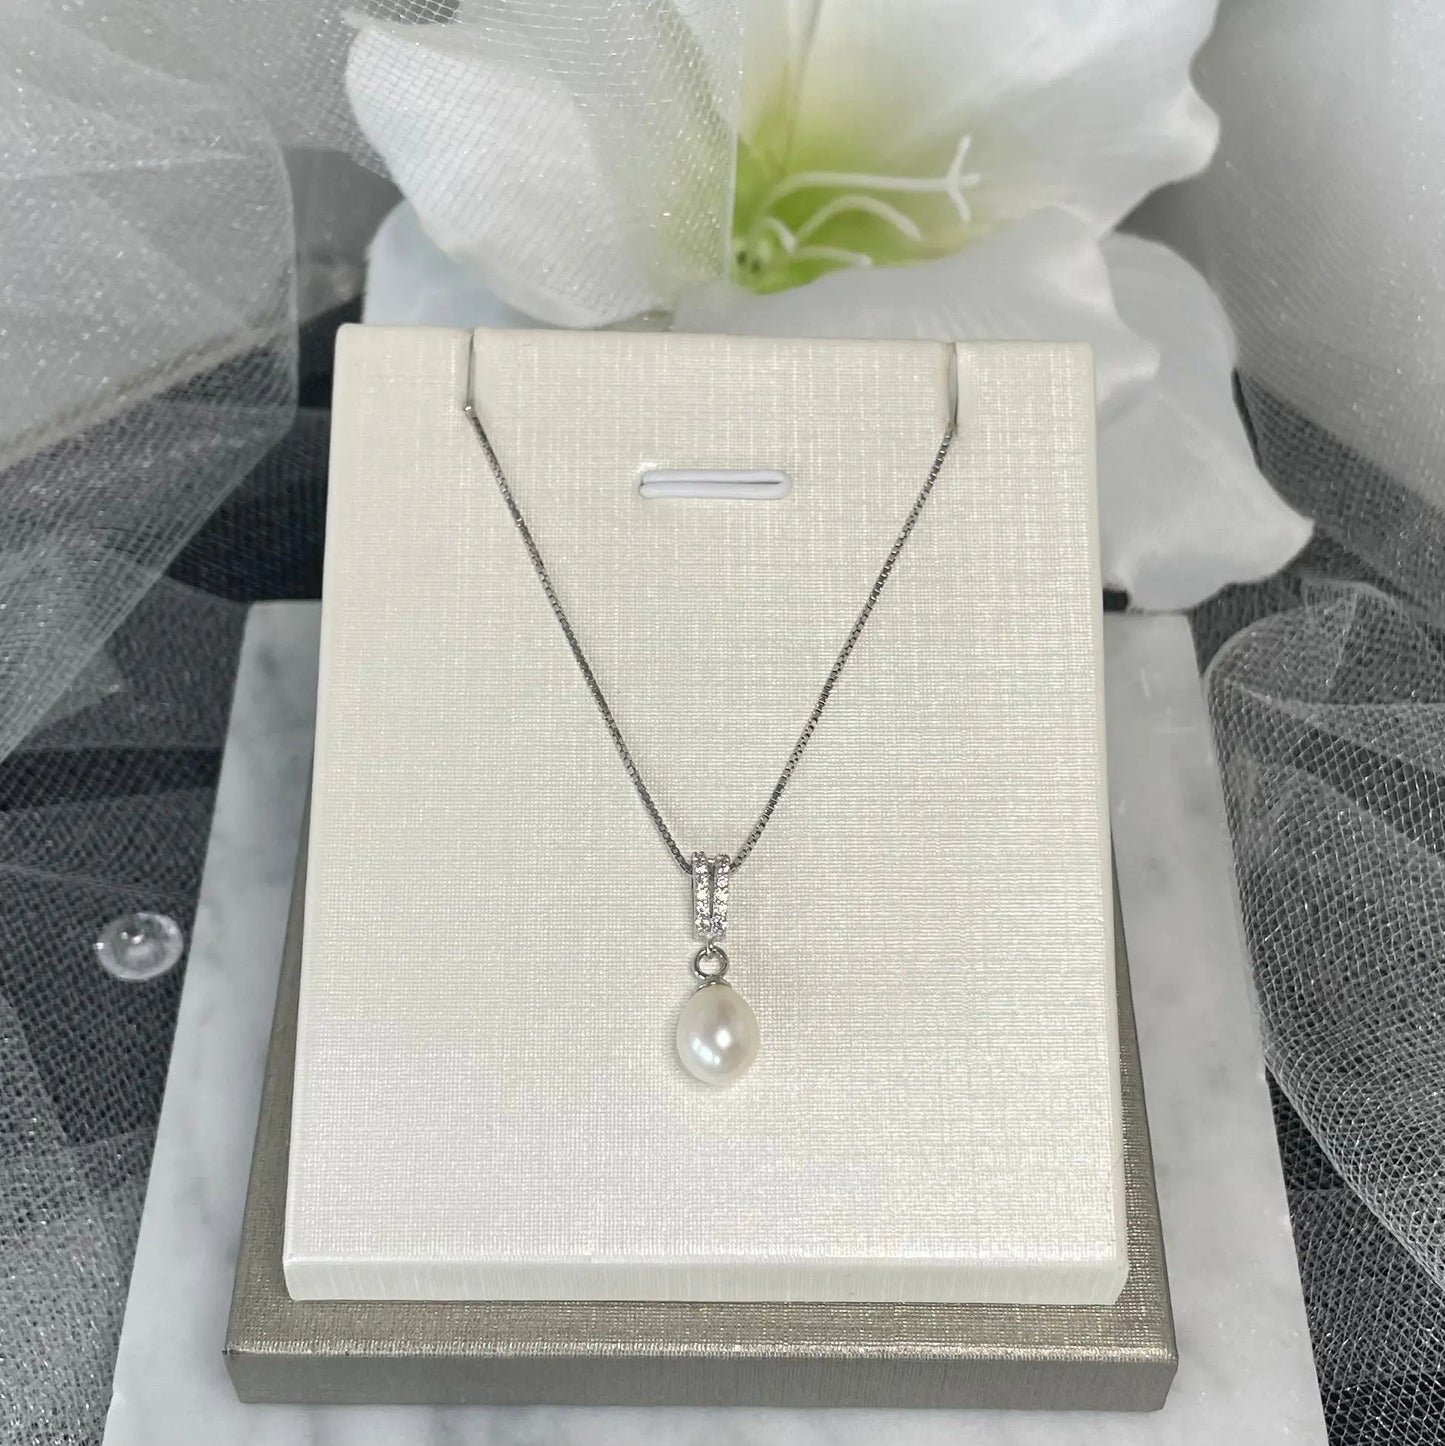 Allyn Earring and Necklace Pearl Set featuring two straight lines of sparkling crystals that drop into a lustrous pearl pendant, with a 45 cm chain, perfect for formal events and everyday wear.